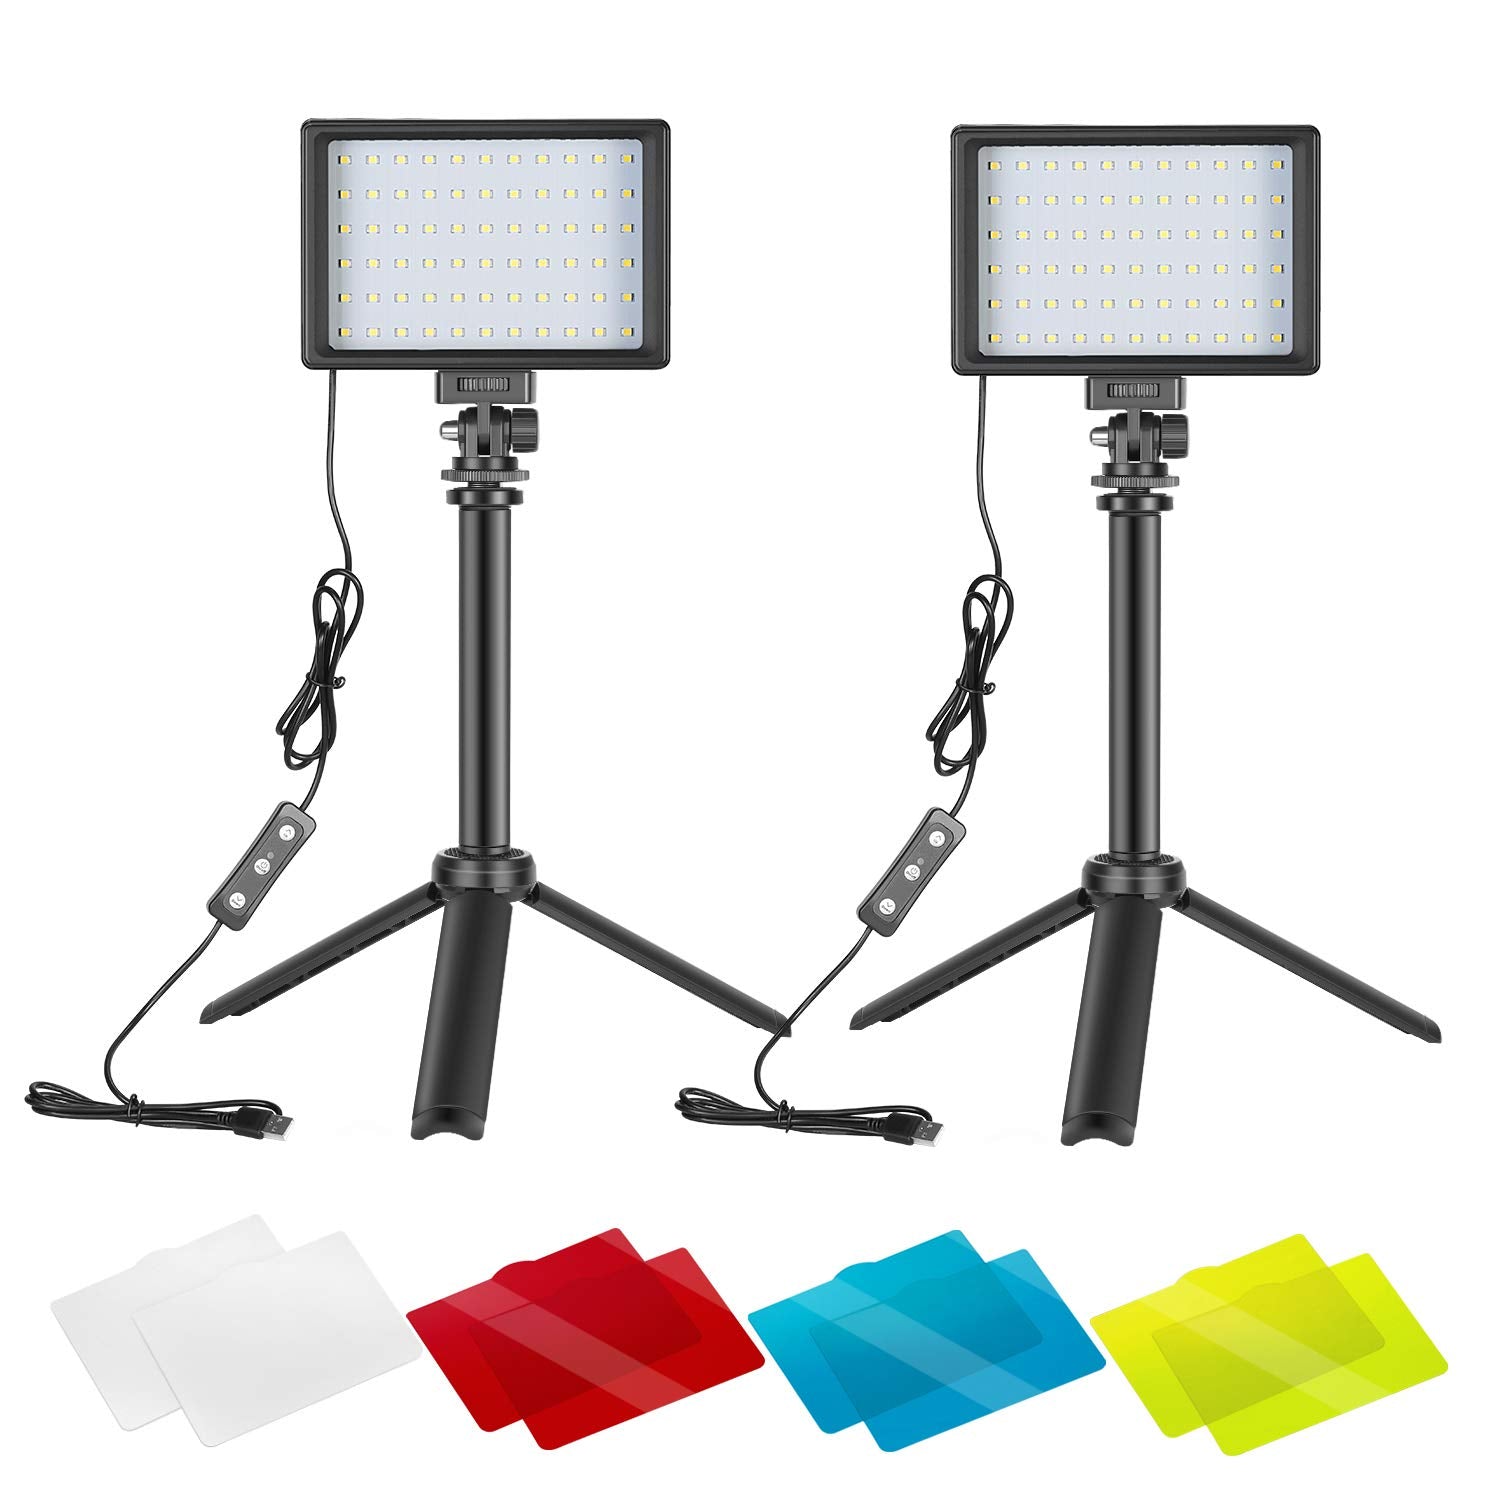 NEEWER 2 Packs Portable Photography Lighting Kit Dimmable 5600K USB 66 LED Video Light with Mini Adjustable Tripod Stand and Color Filters for Table Top/Low Angle Photo Video Studio Shooting